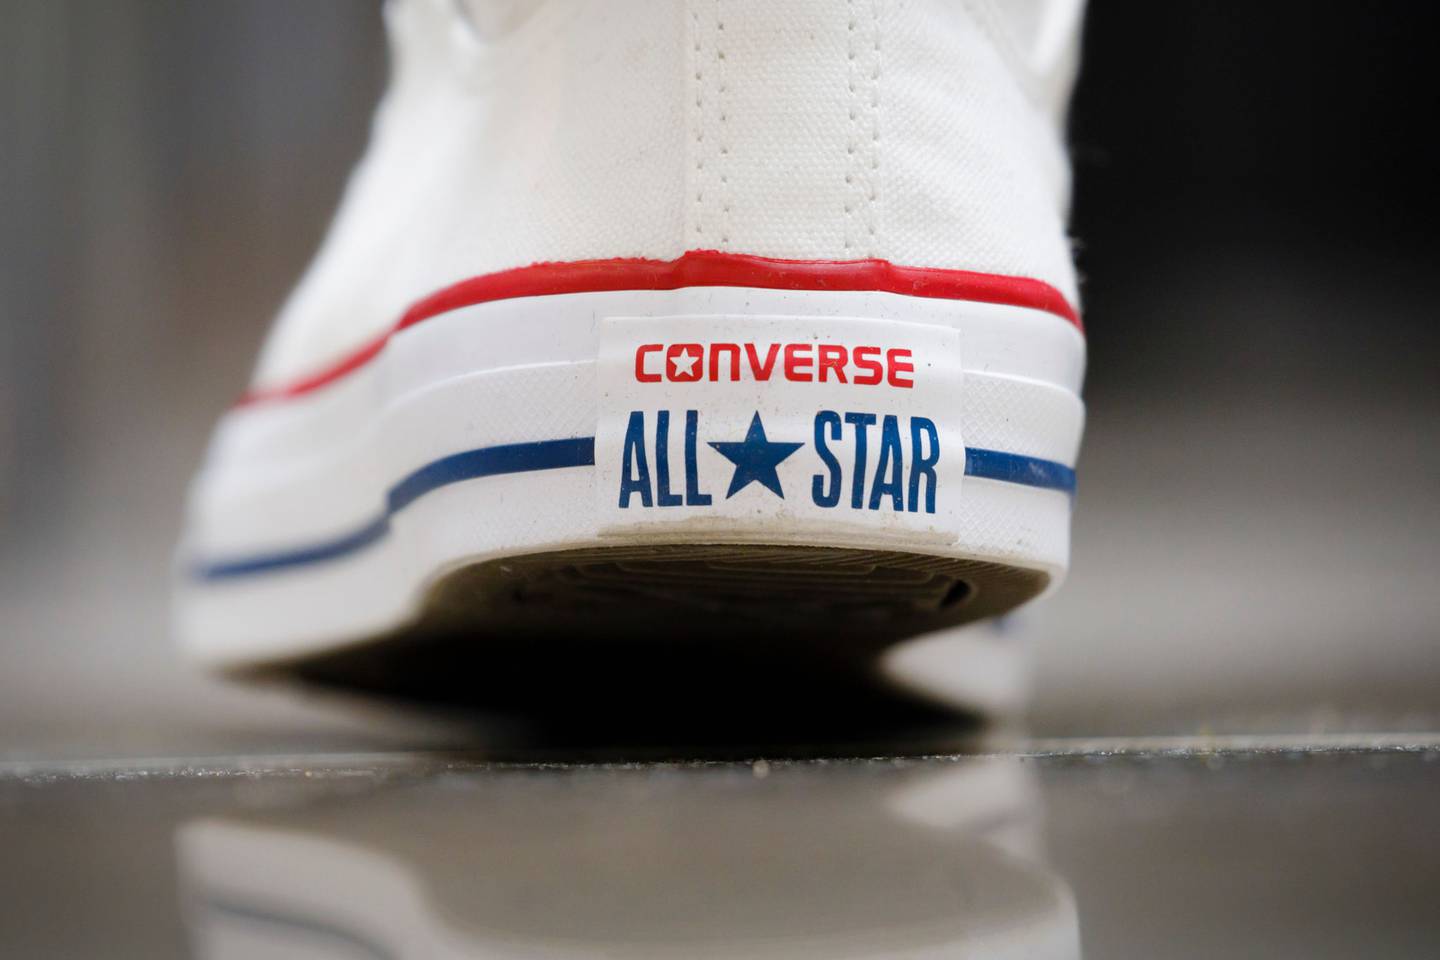 The white model with red and blue details of the Converse Chuck Taylor All Star was created for the 1936 Olympic Games.